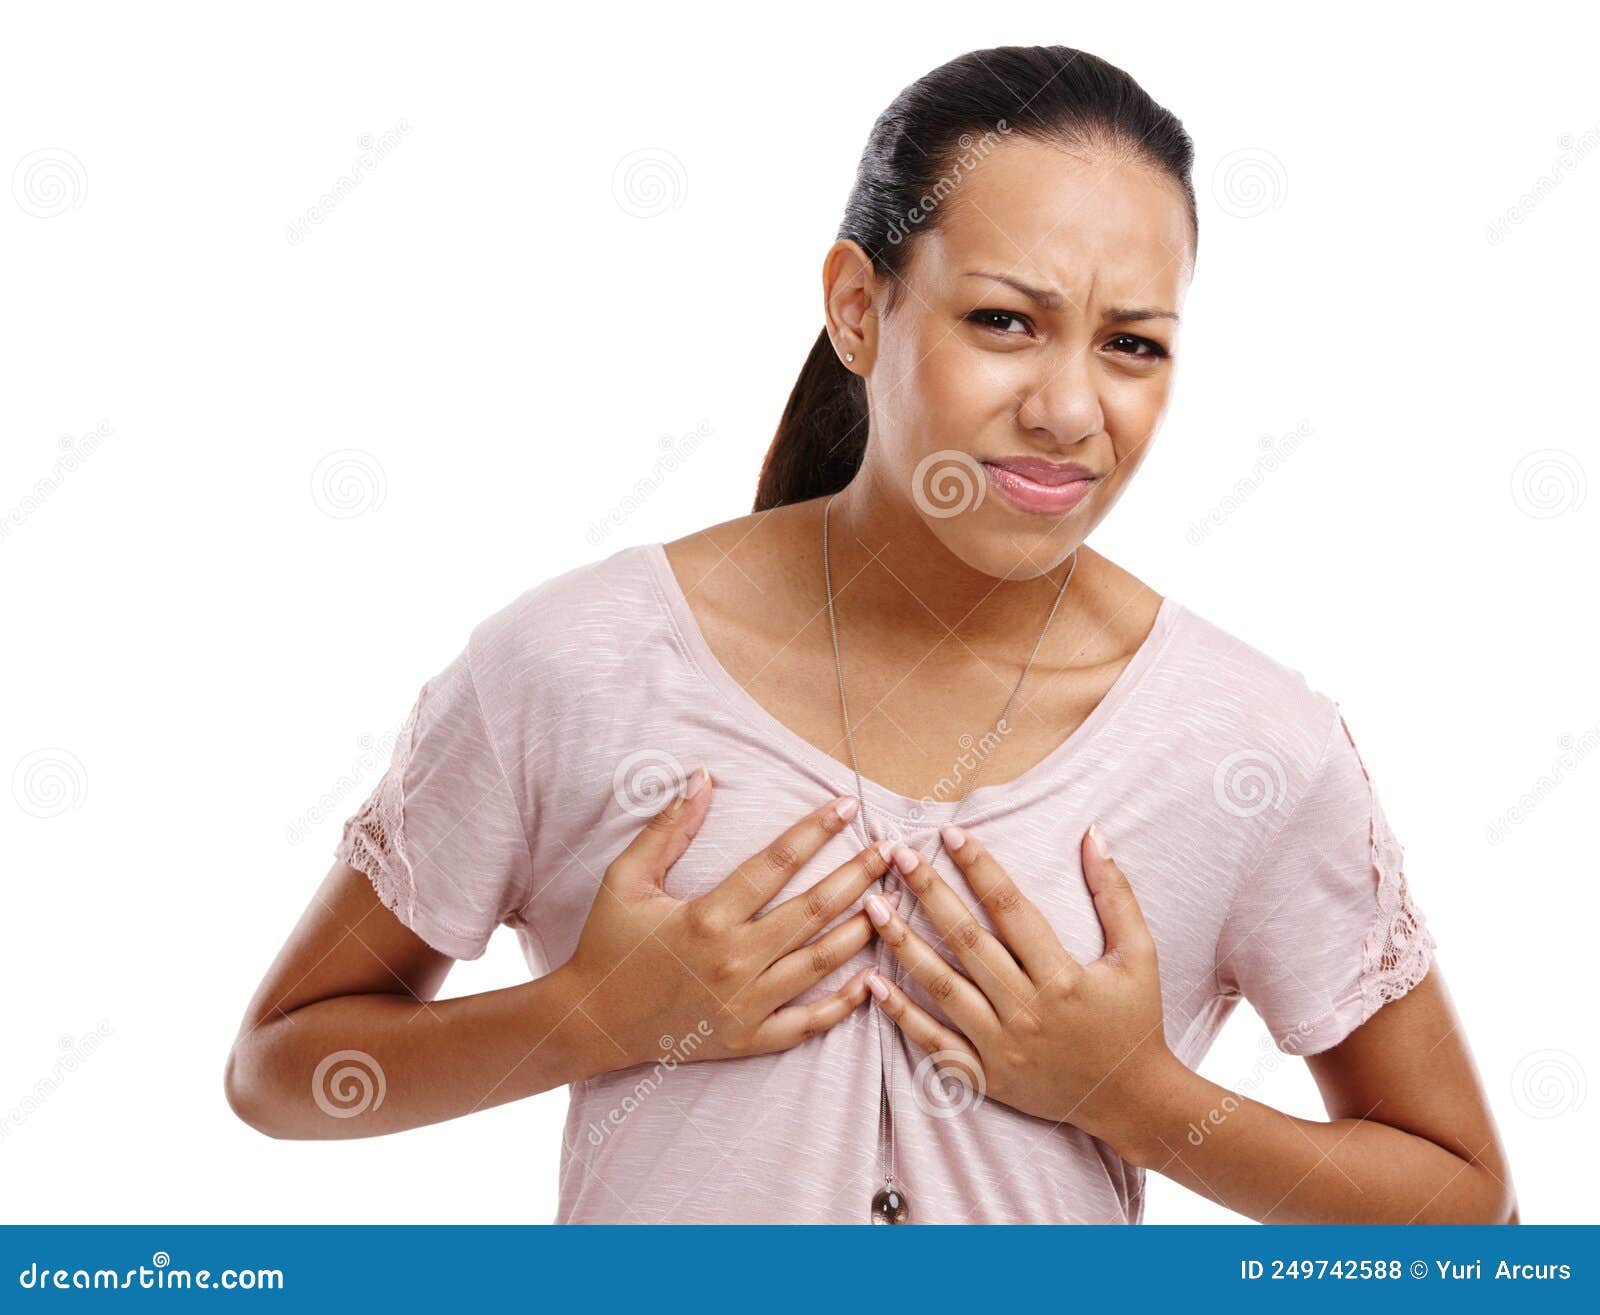 Young Woman Small Boobs Wearing Uncomfortable Stock Photo 1827984899